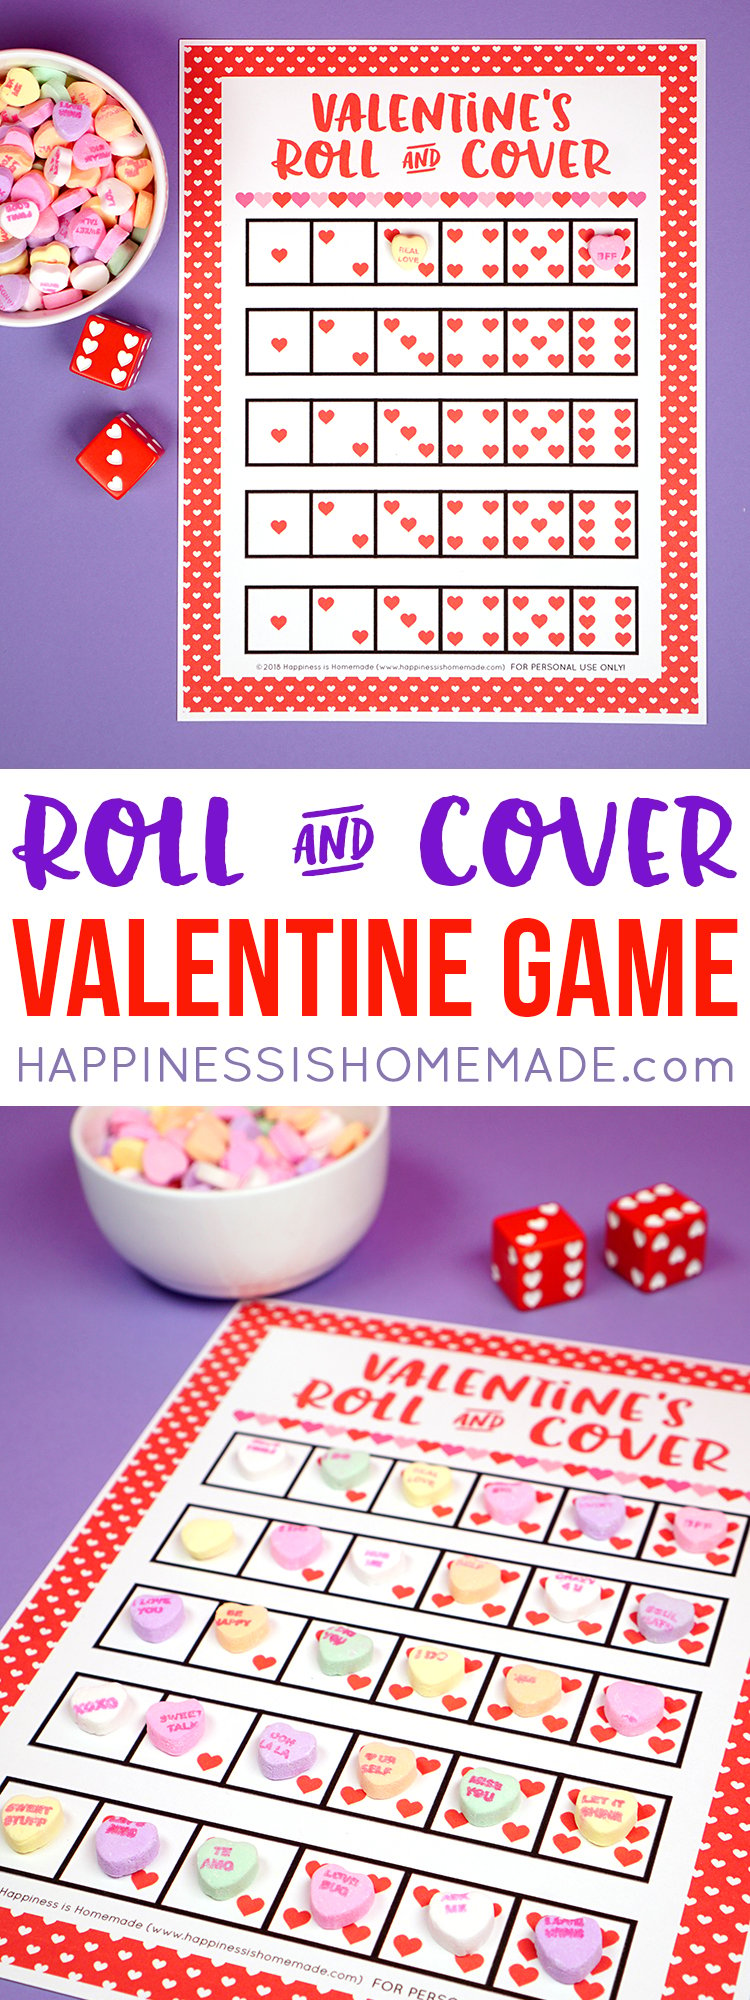 valentines day roll and cover game